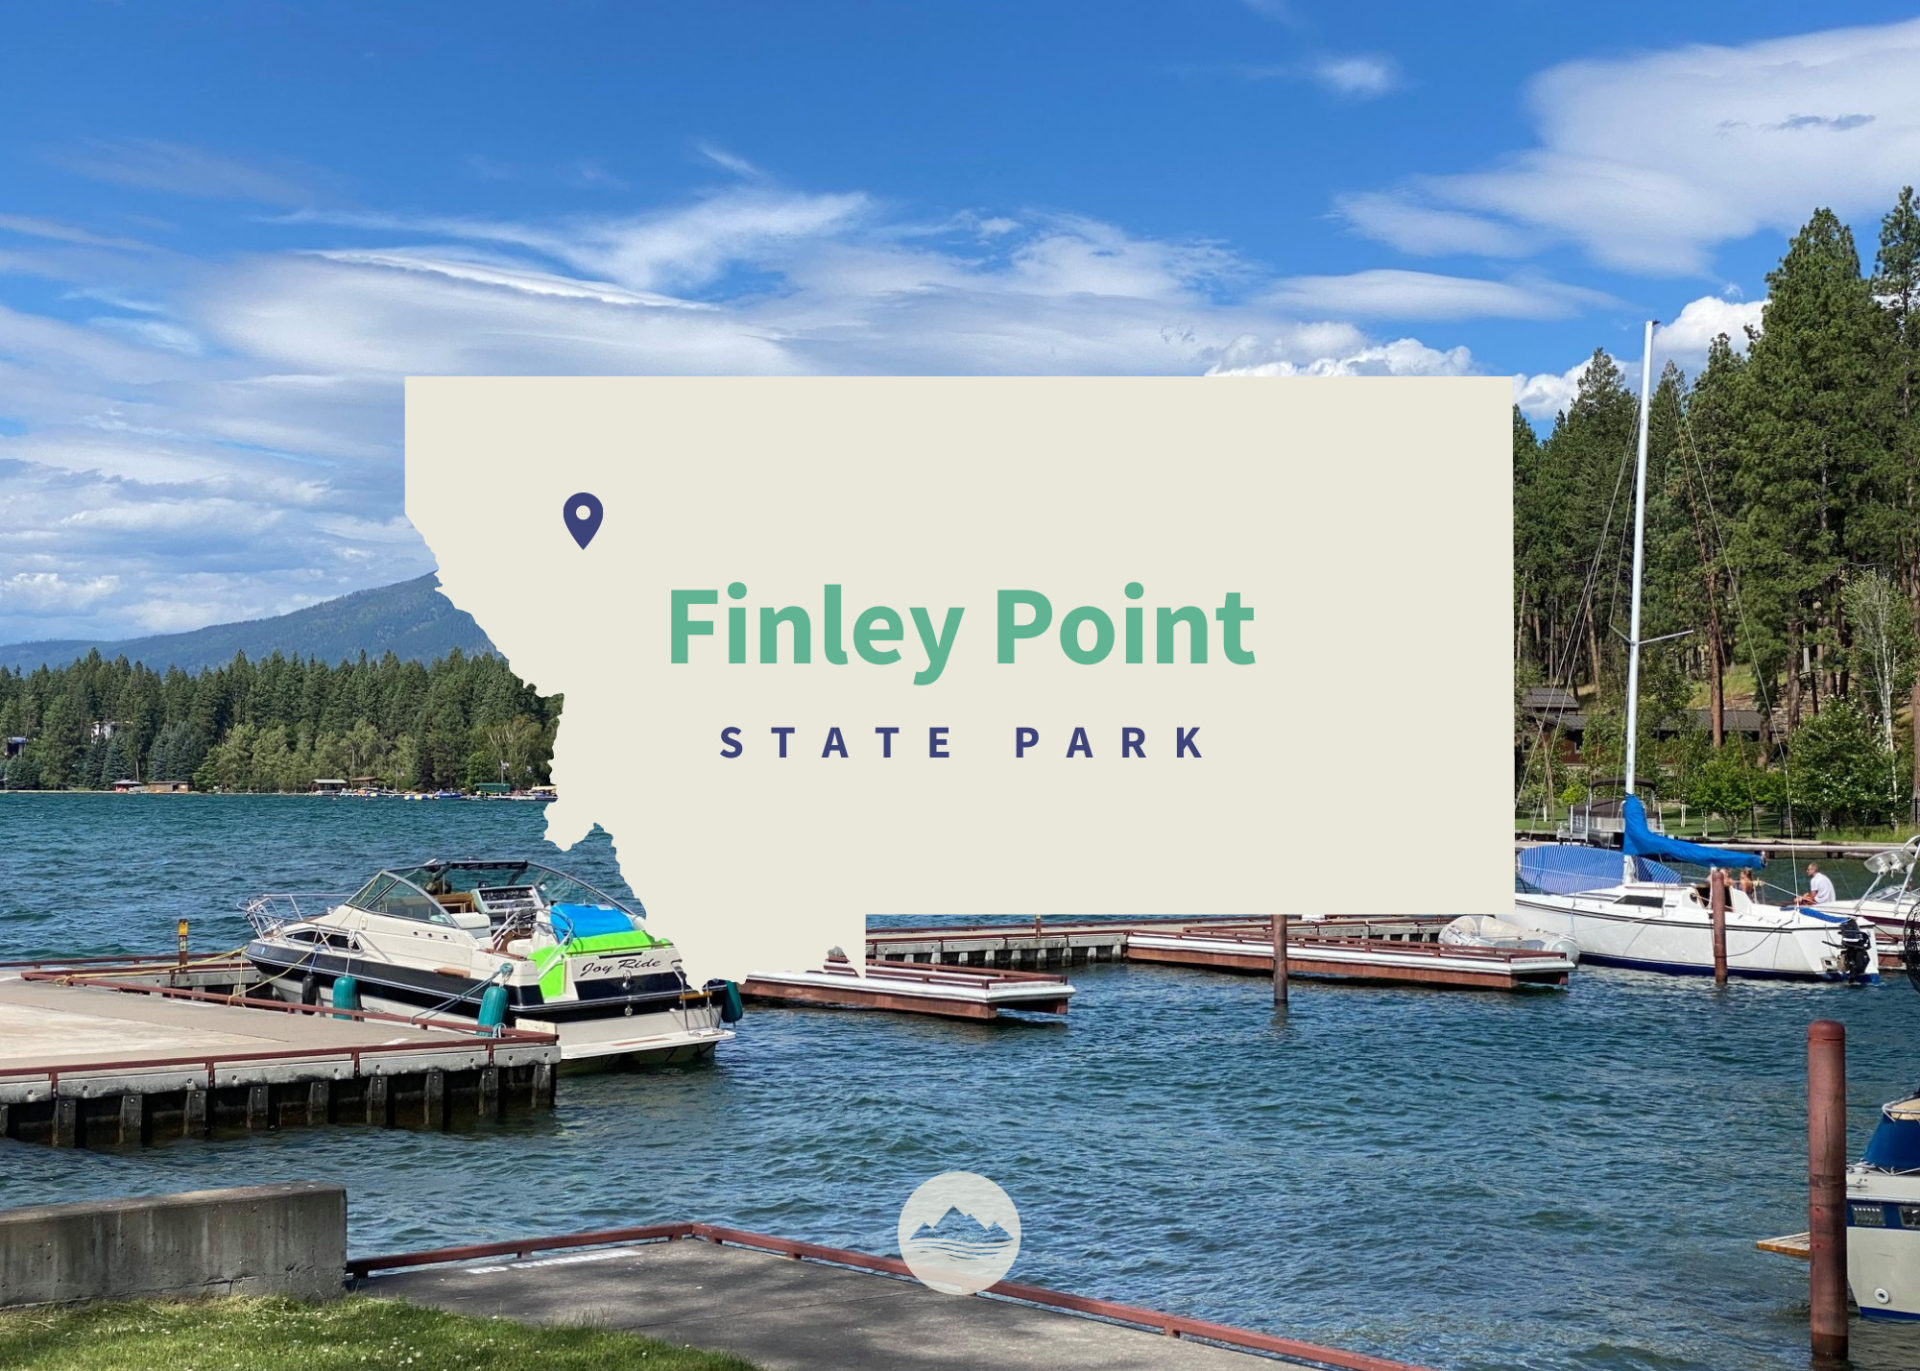 Finley Point State Park